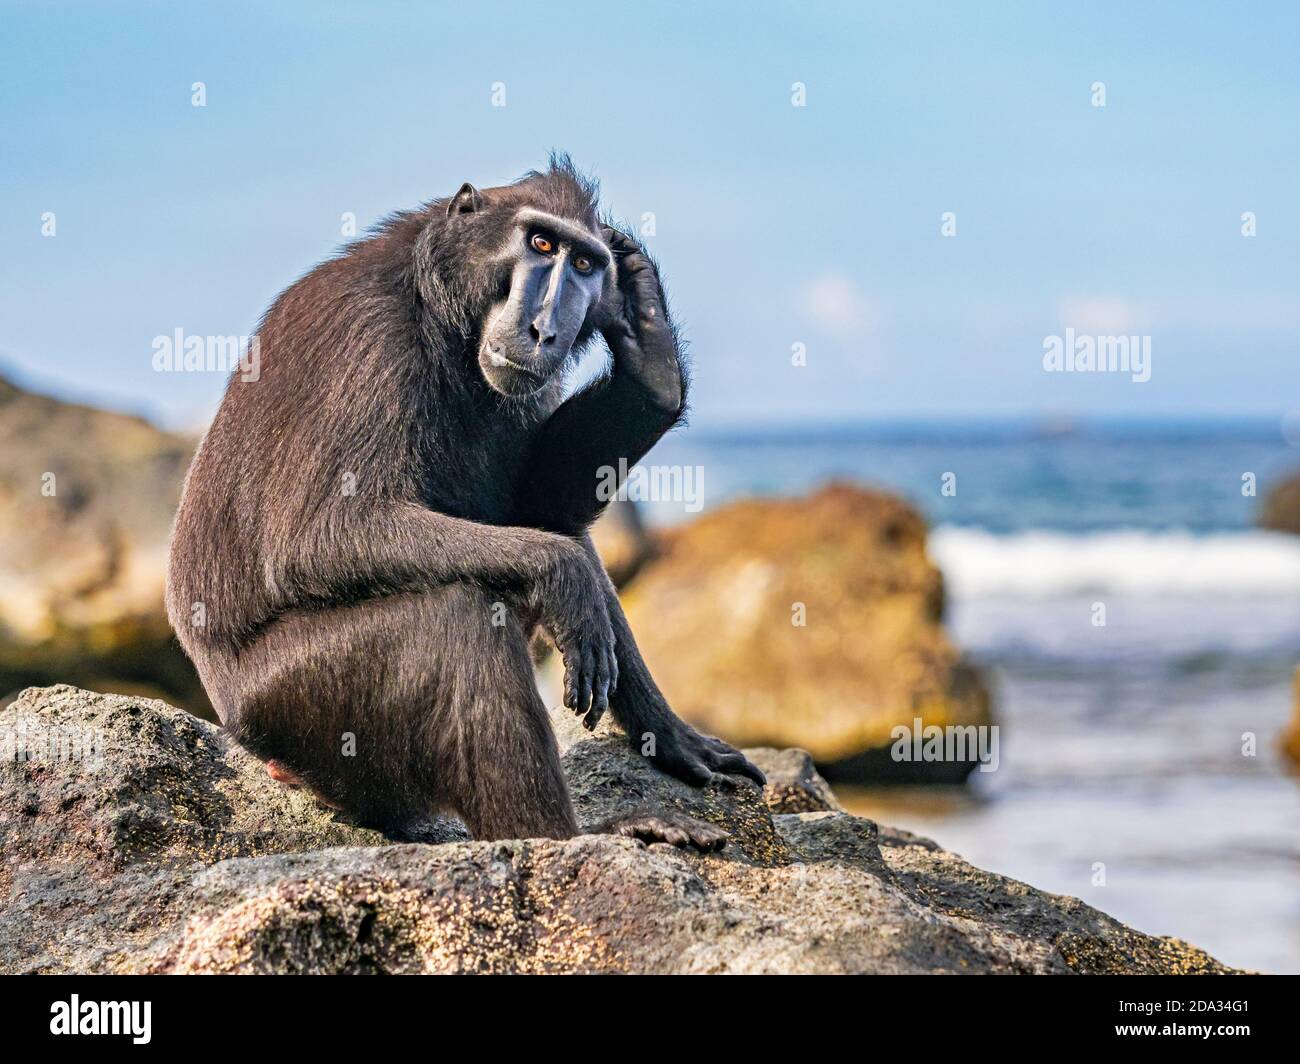 Black Crested Macaques in Tangkoko Nature Reserve, North Sulawesi, Indonesia Stock Photo